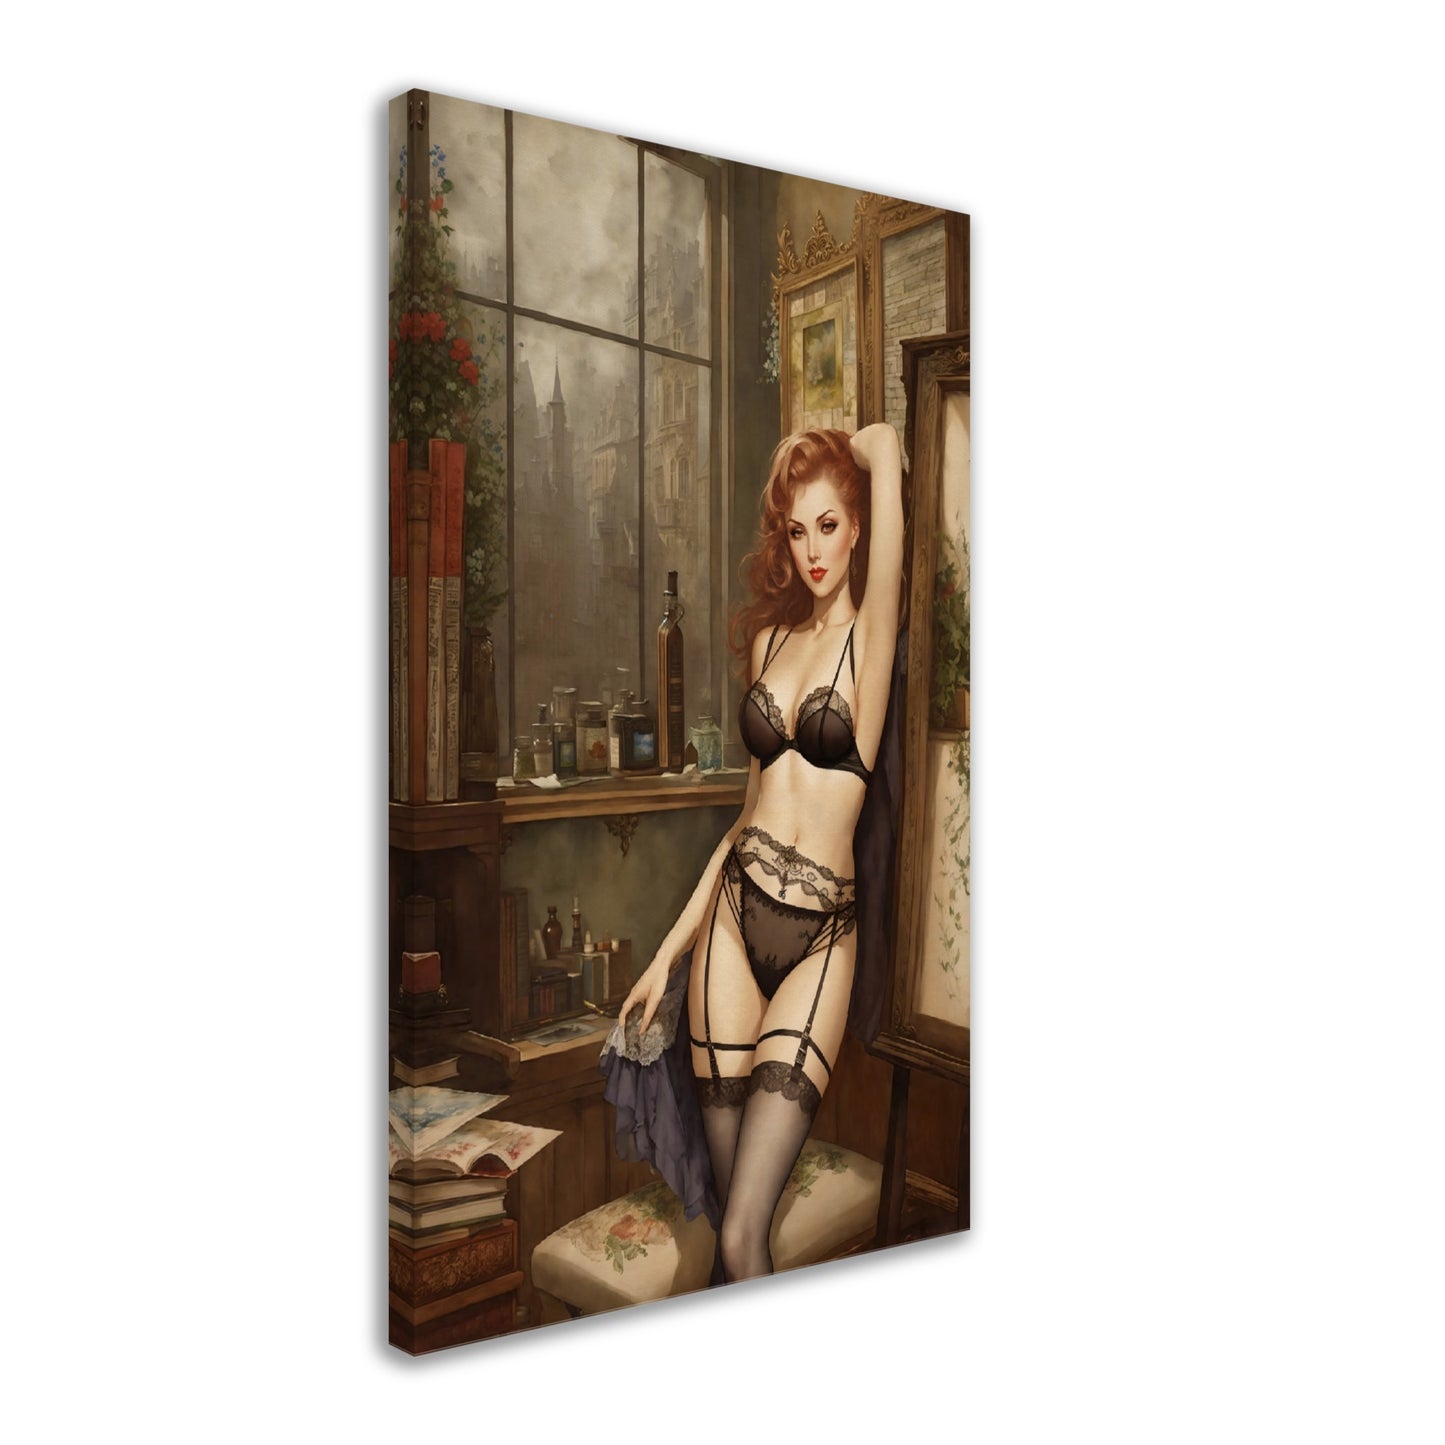 Daily Pinup #28 - Room With A View Wall Art